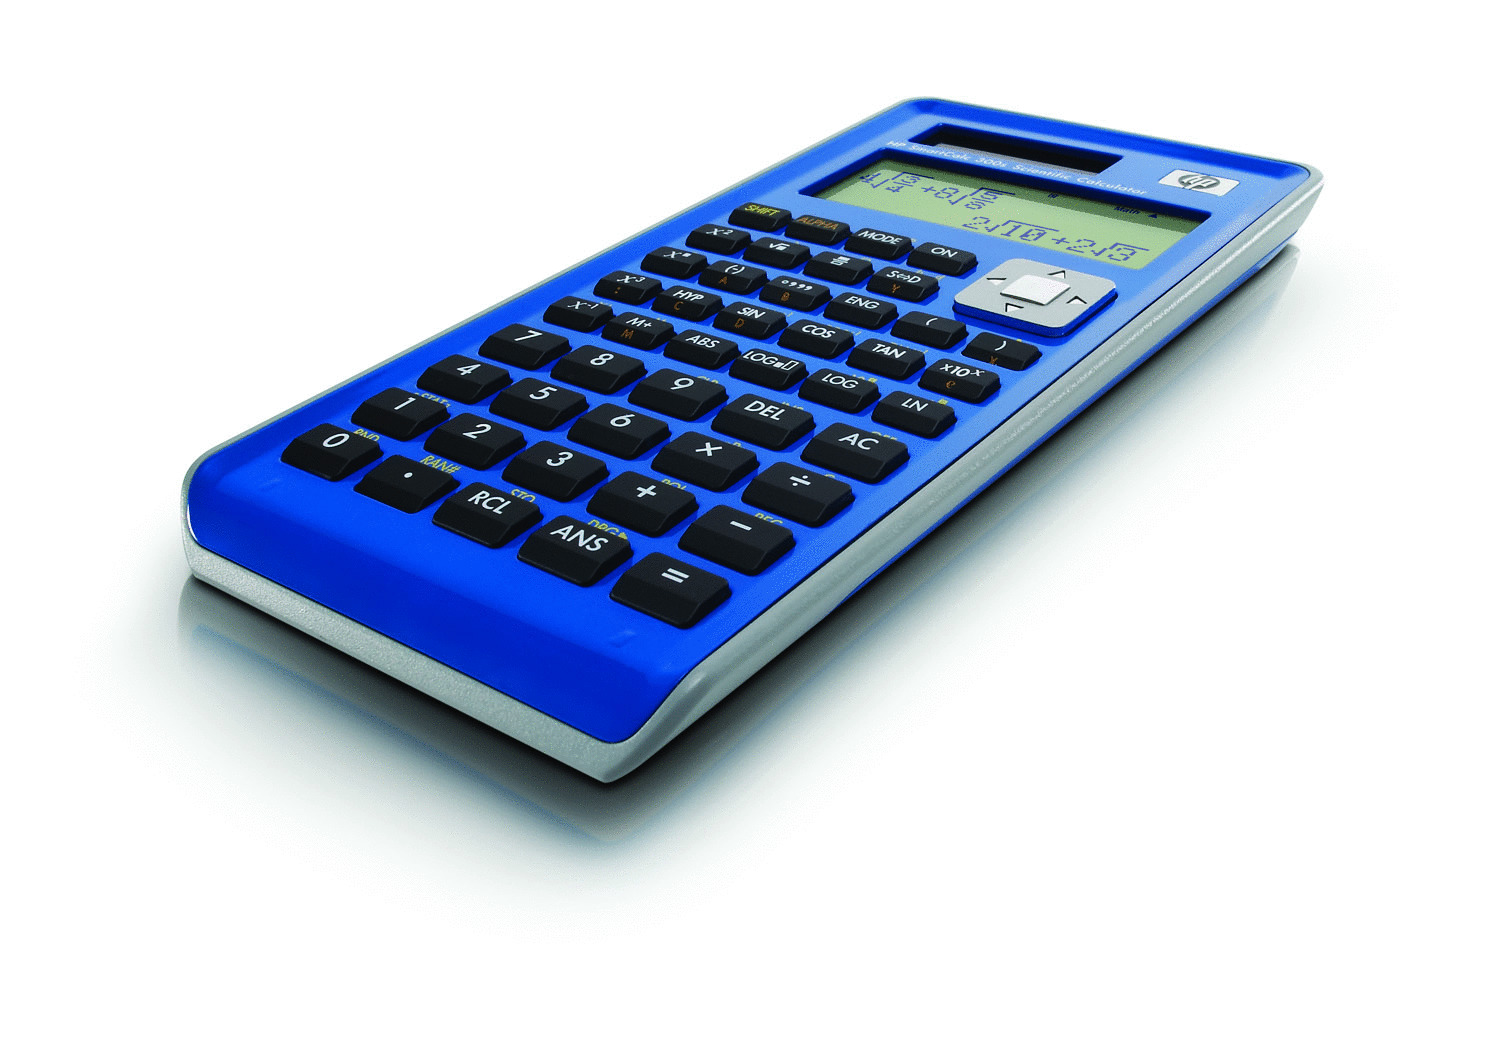 HP Smartcalc 300s Scientific Calculator with 249 Built-in Functions Logical Accurate Easy-to-Use 